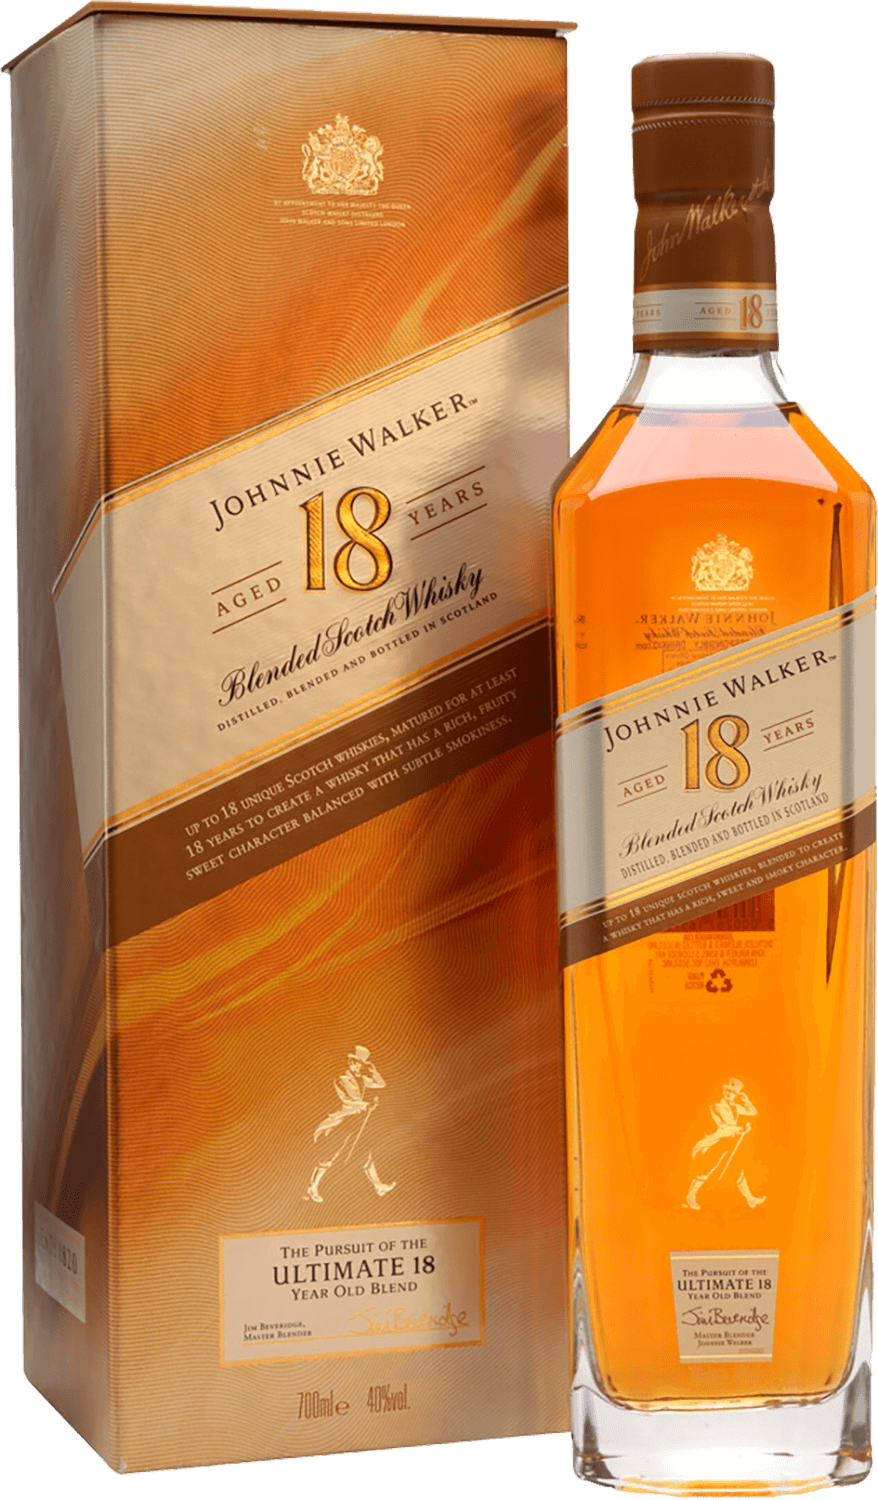 Johnnie Walker 18 y.o. Blended Scotch Whisky (gift box) johnnie walker black label blended scotch whisky gift box